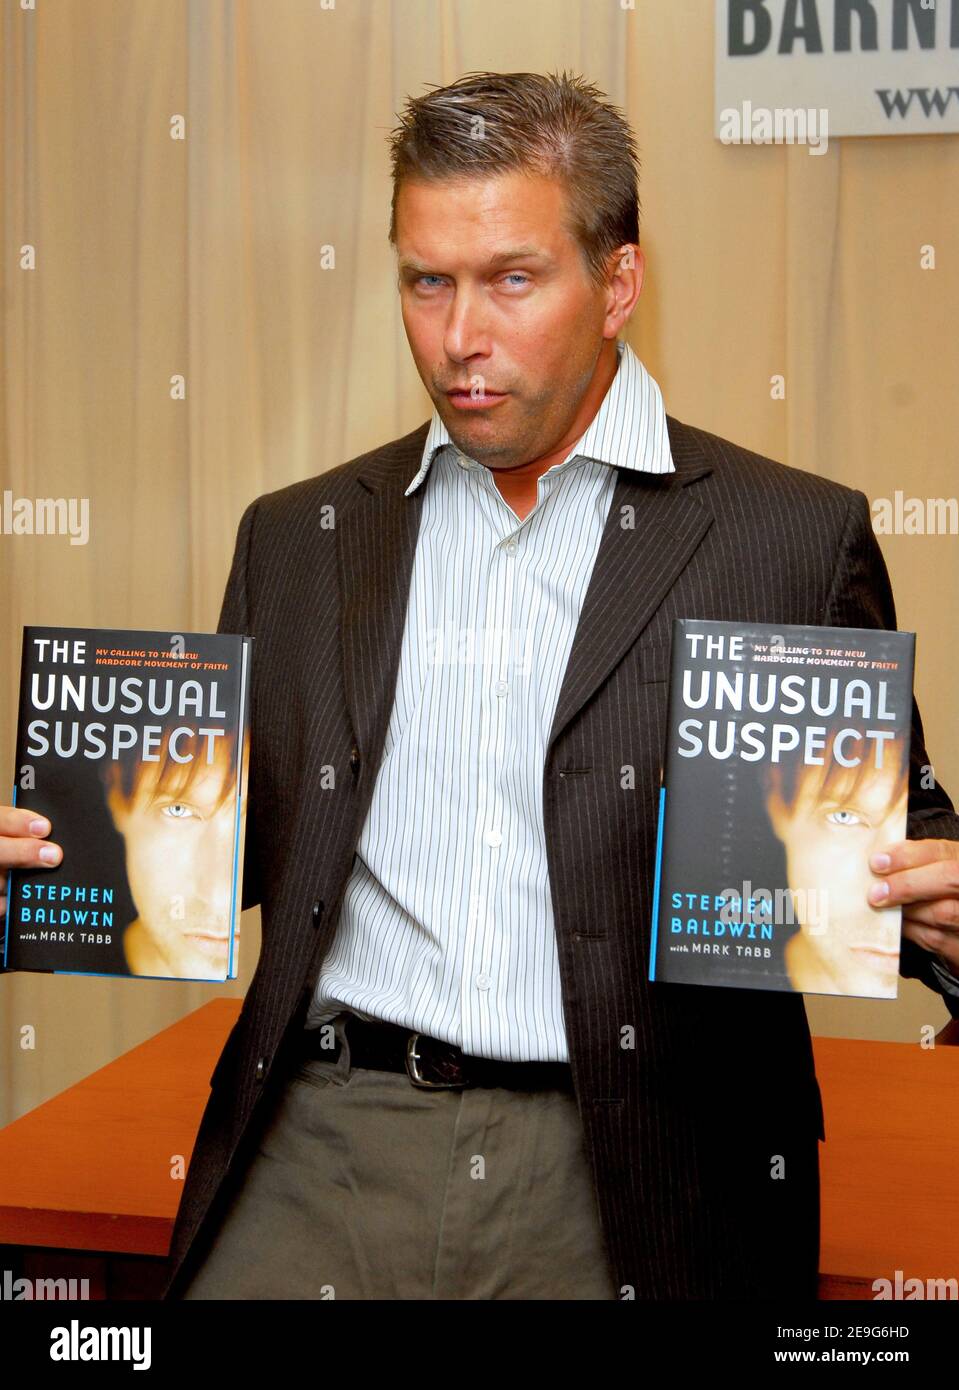 Actor Stephen Baldwin signs copies of 'Unusal Suspect', a book about his journey from bad boy to a born again Christian, at Barnes and Noble Booksellers on Fifth Avenue in New York City, NY, USA on September 19, 2006. Photo by Gregorio Binuya/ABACAPRESS.COM Stock Photo